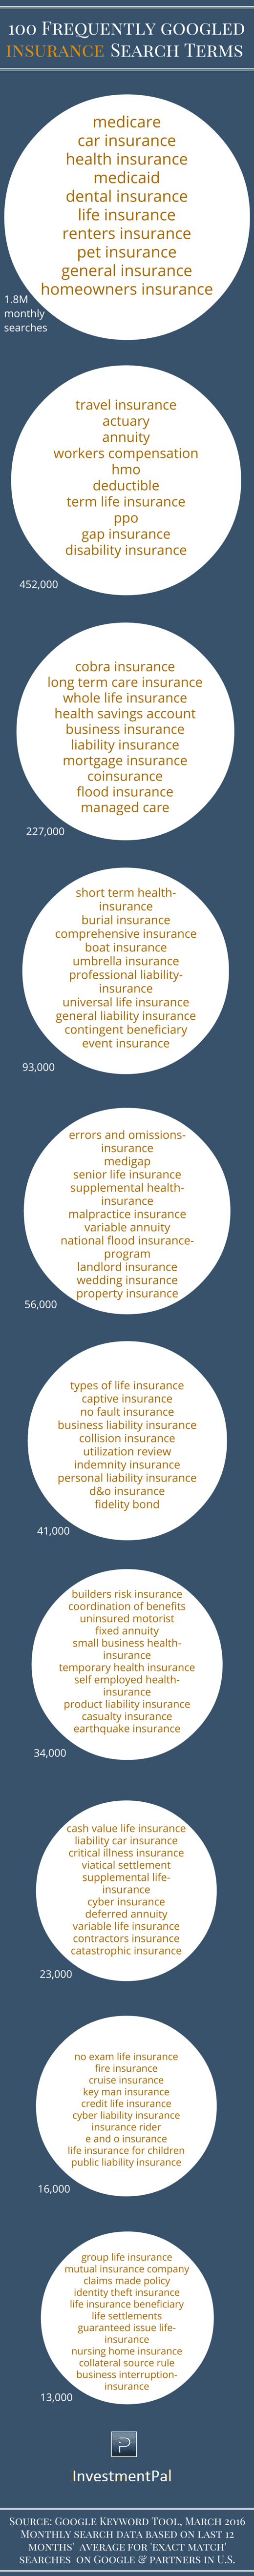 insurance search terms